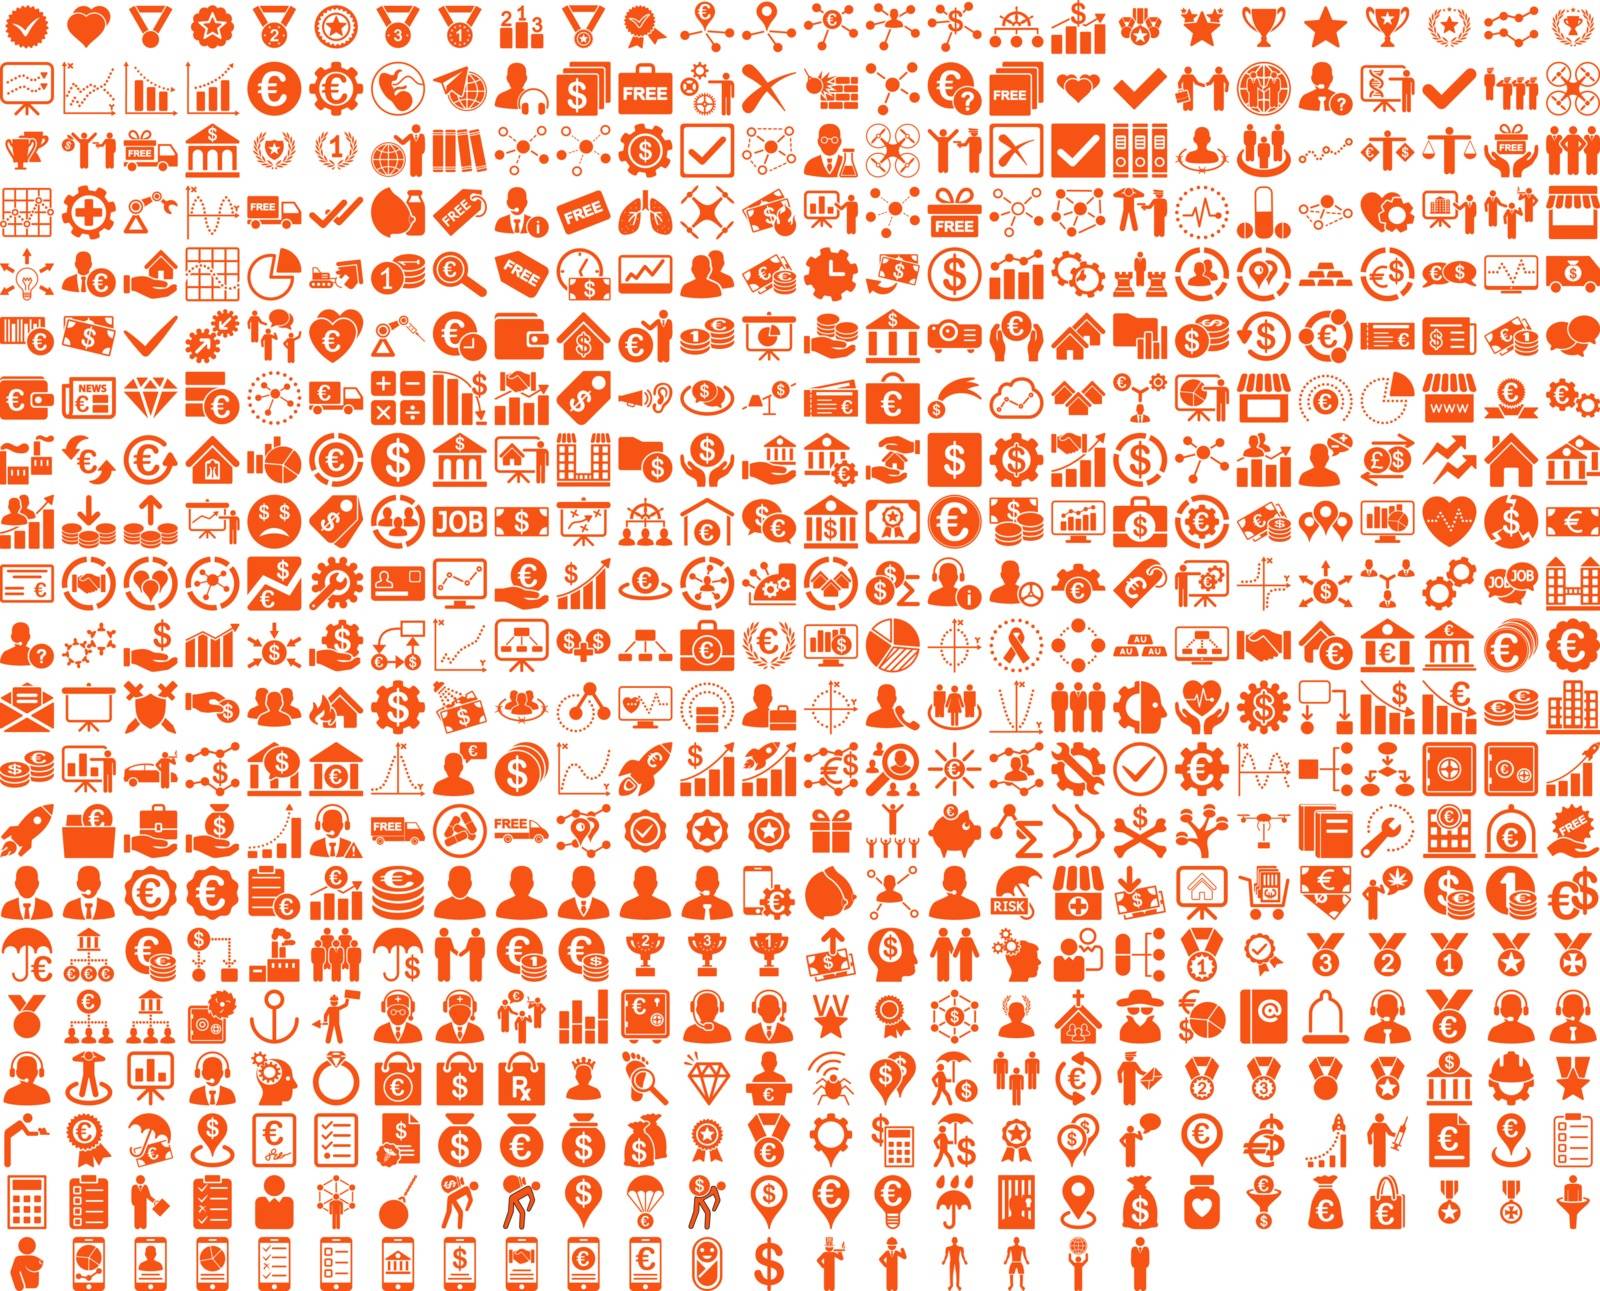 Application Toolbar Icons. 576 flat icons use orange color. Vector images are isolated on a white background. 